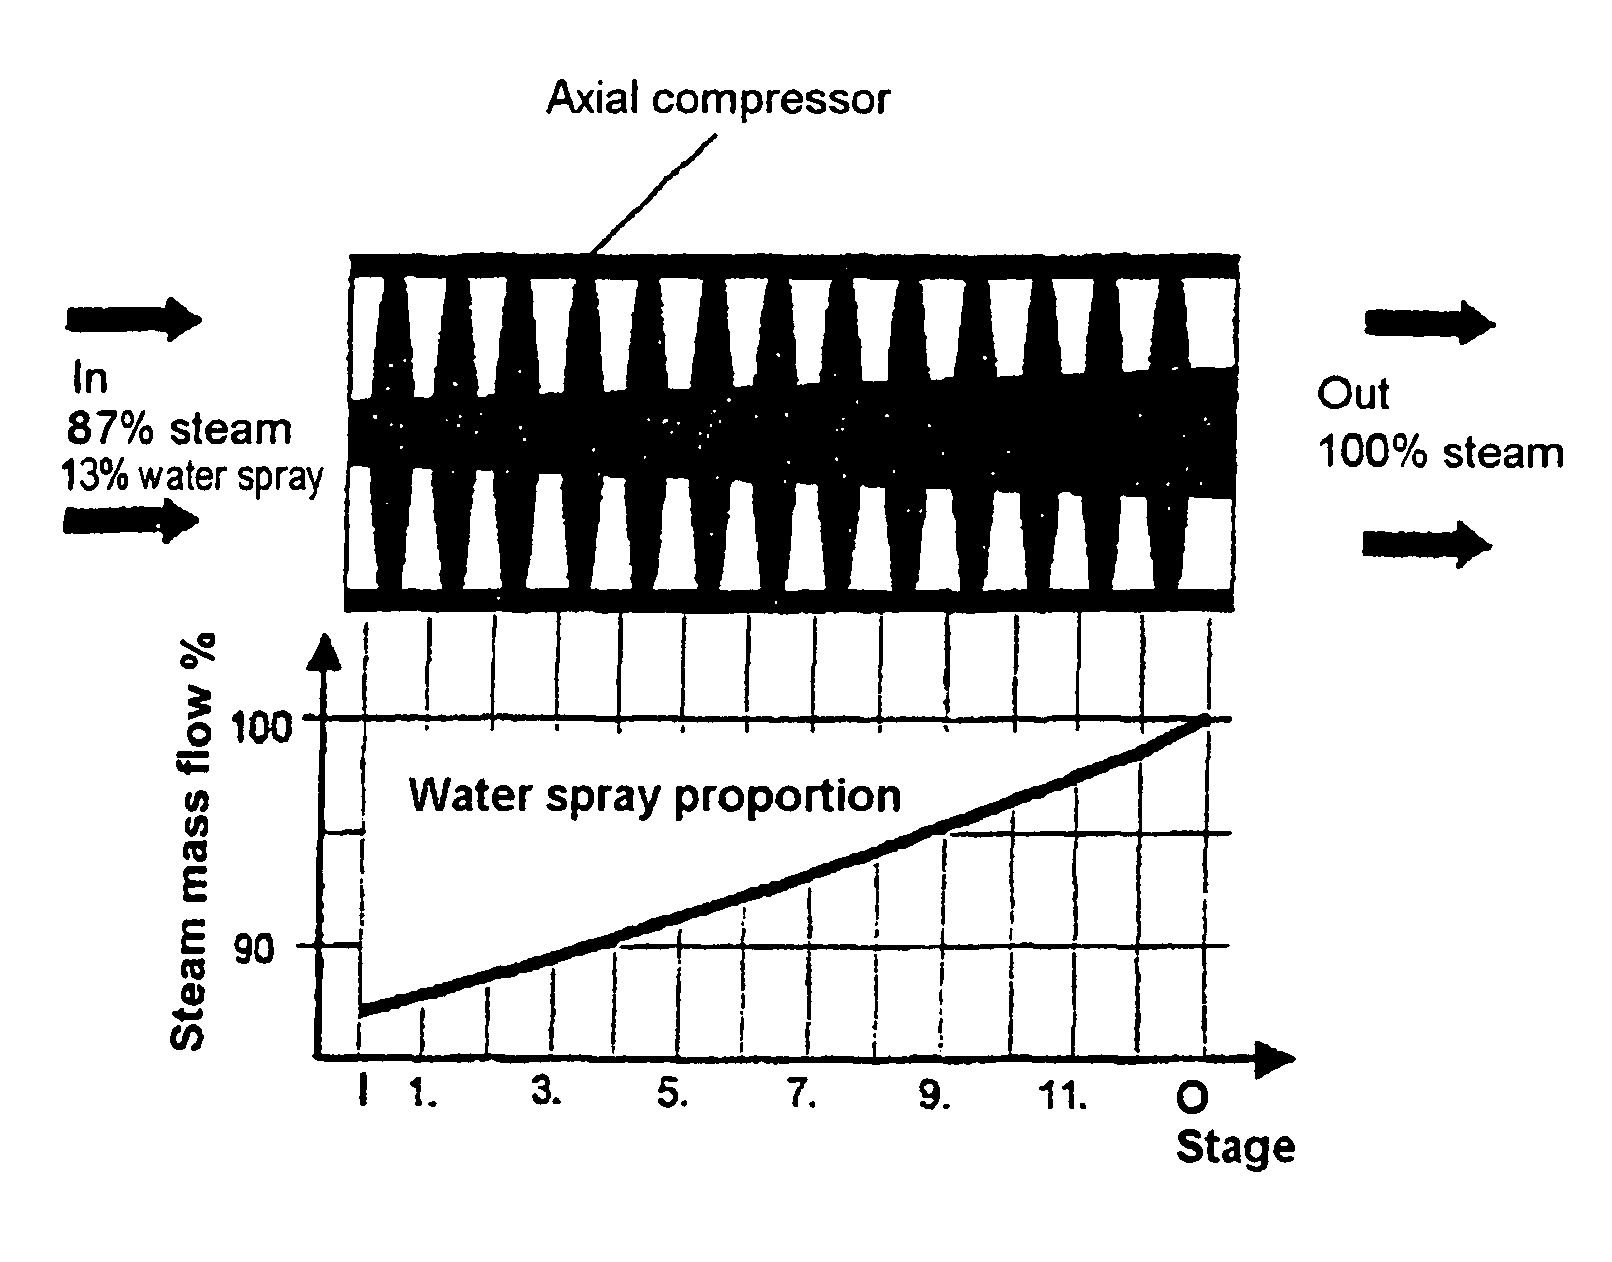 Method for compressing the working fluid during a water/steam combination process